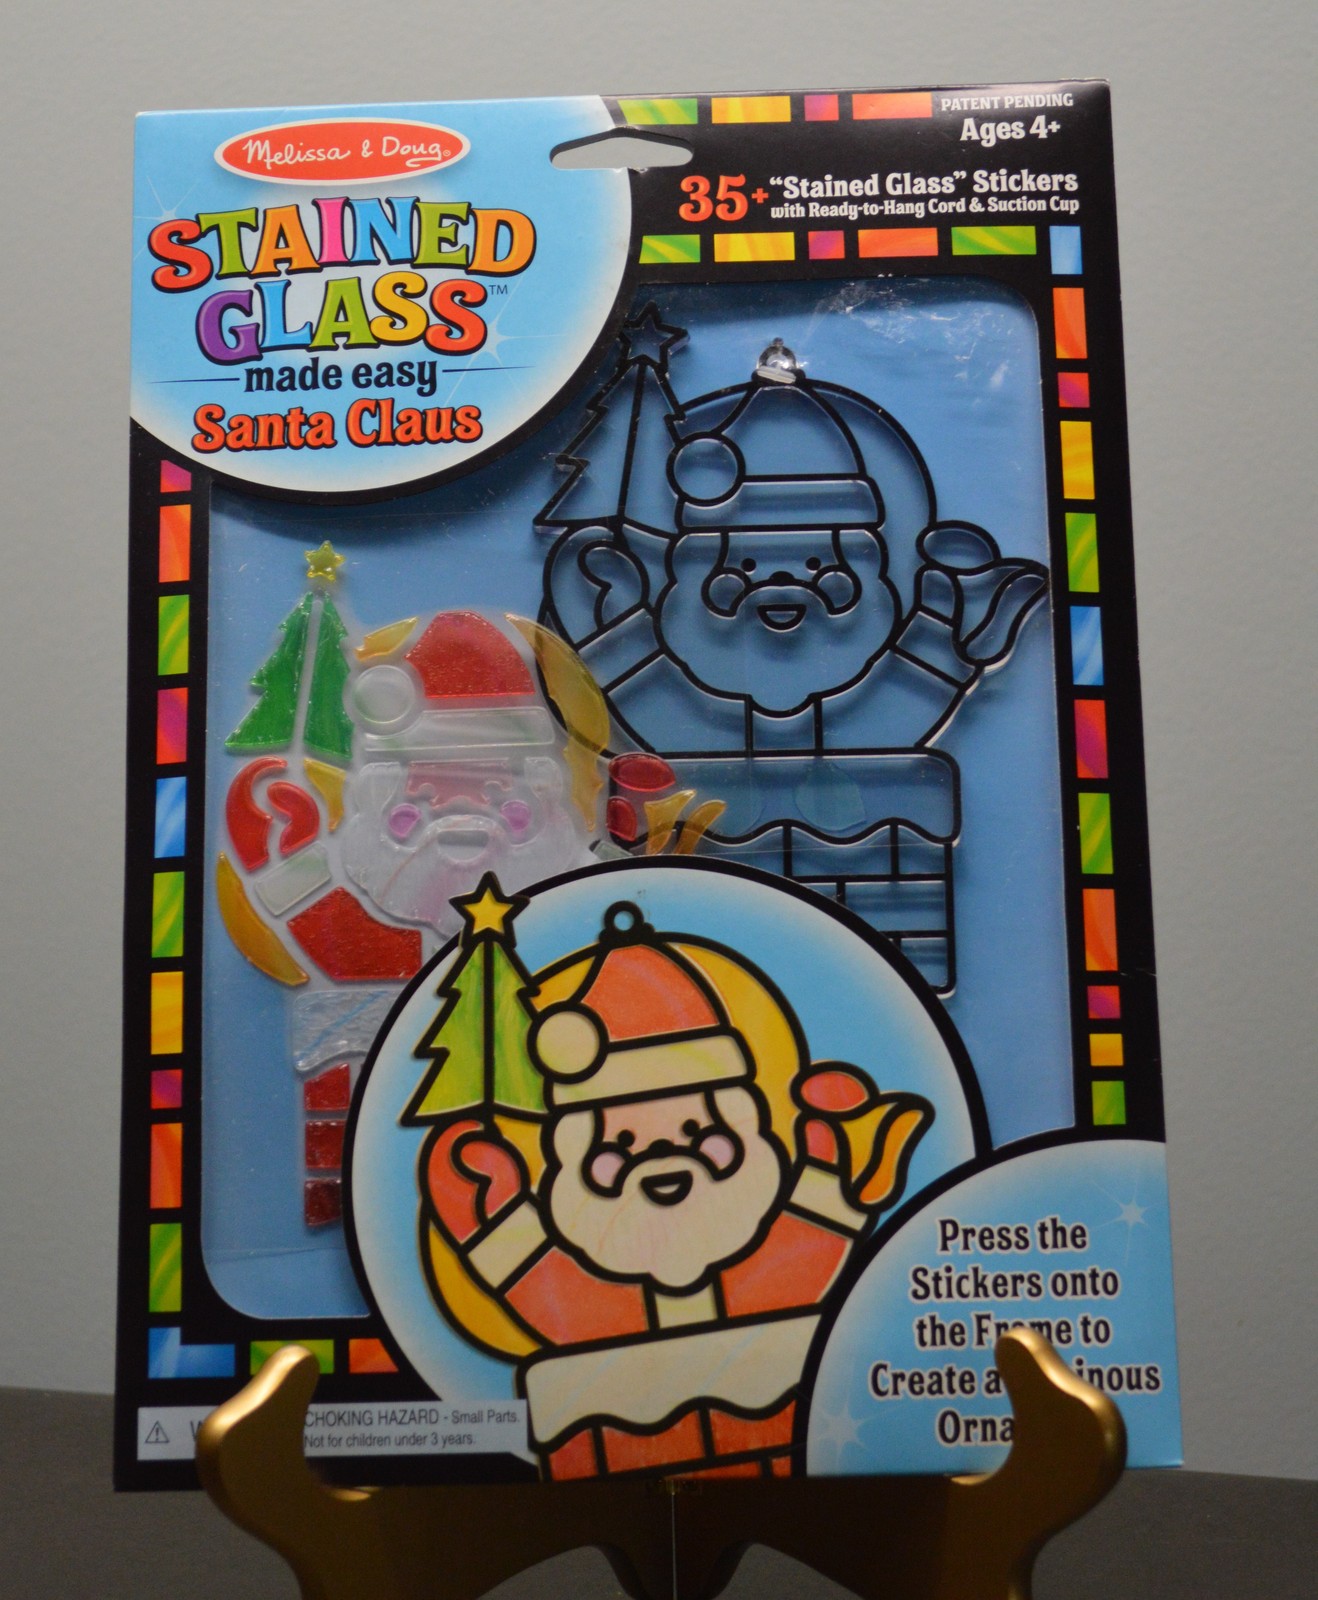 Melissa & Doug Holiday Craft NEW in package Stained Glass made easy Santa Claus - $6.00